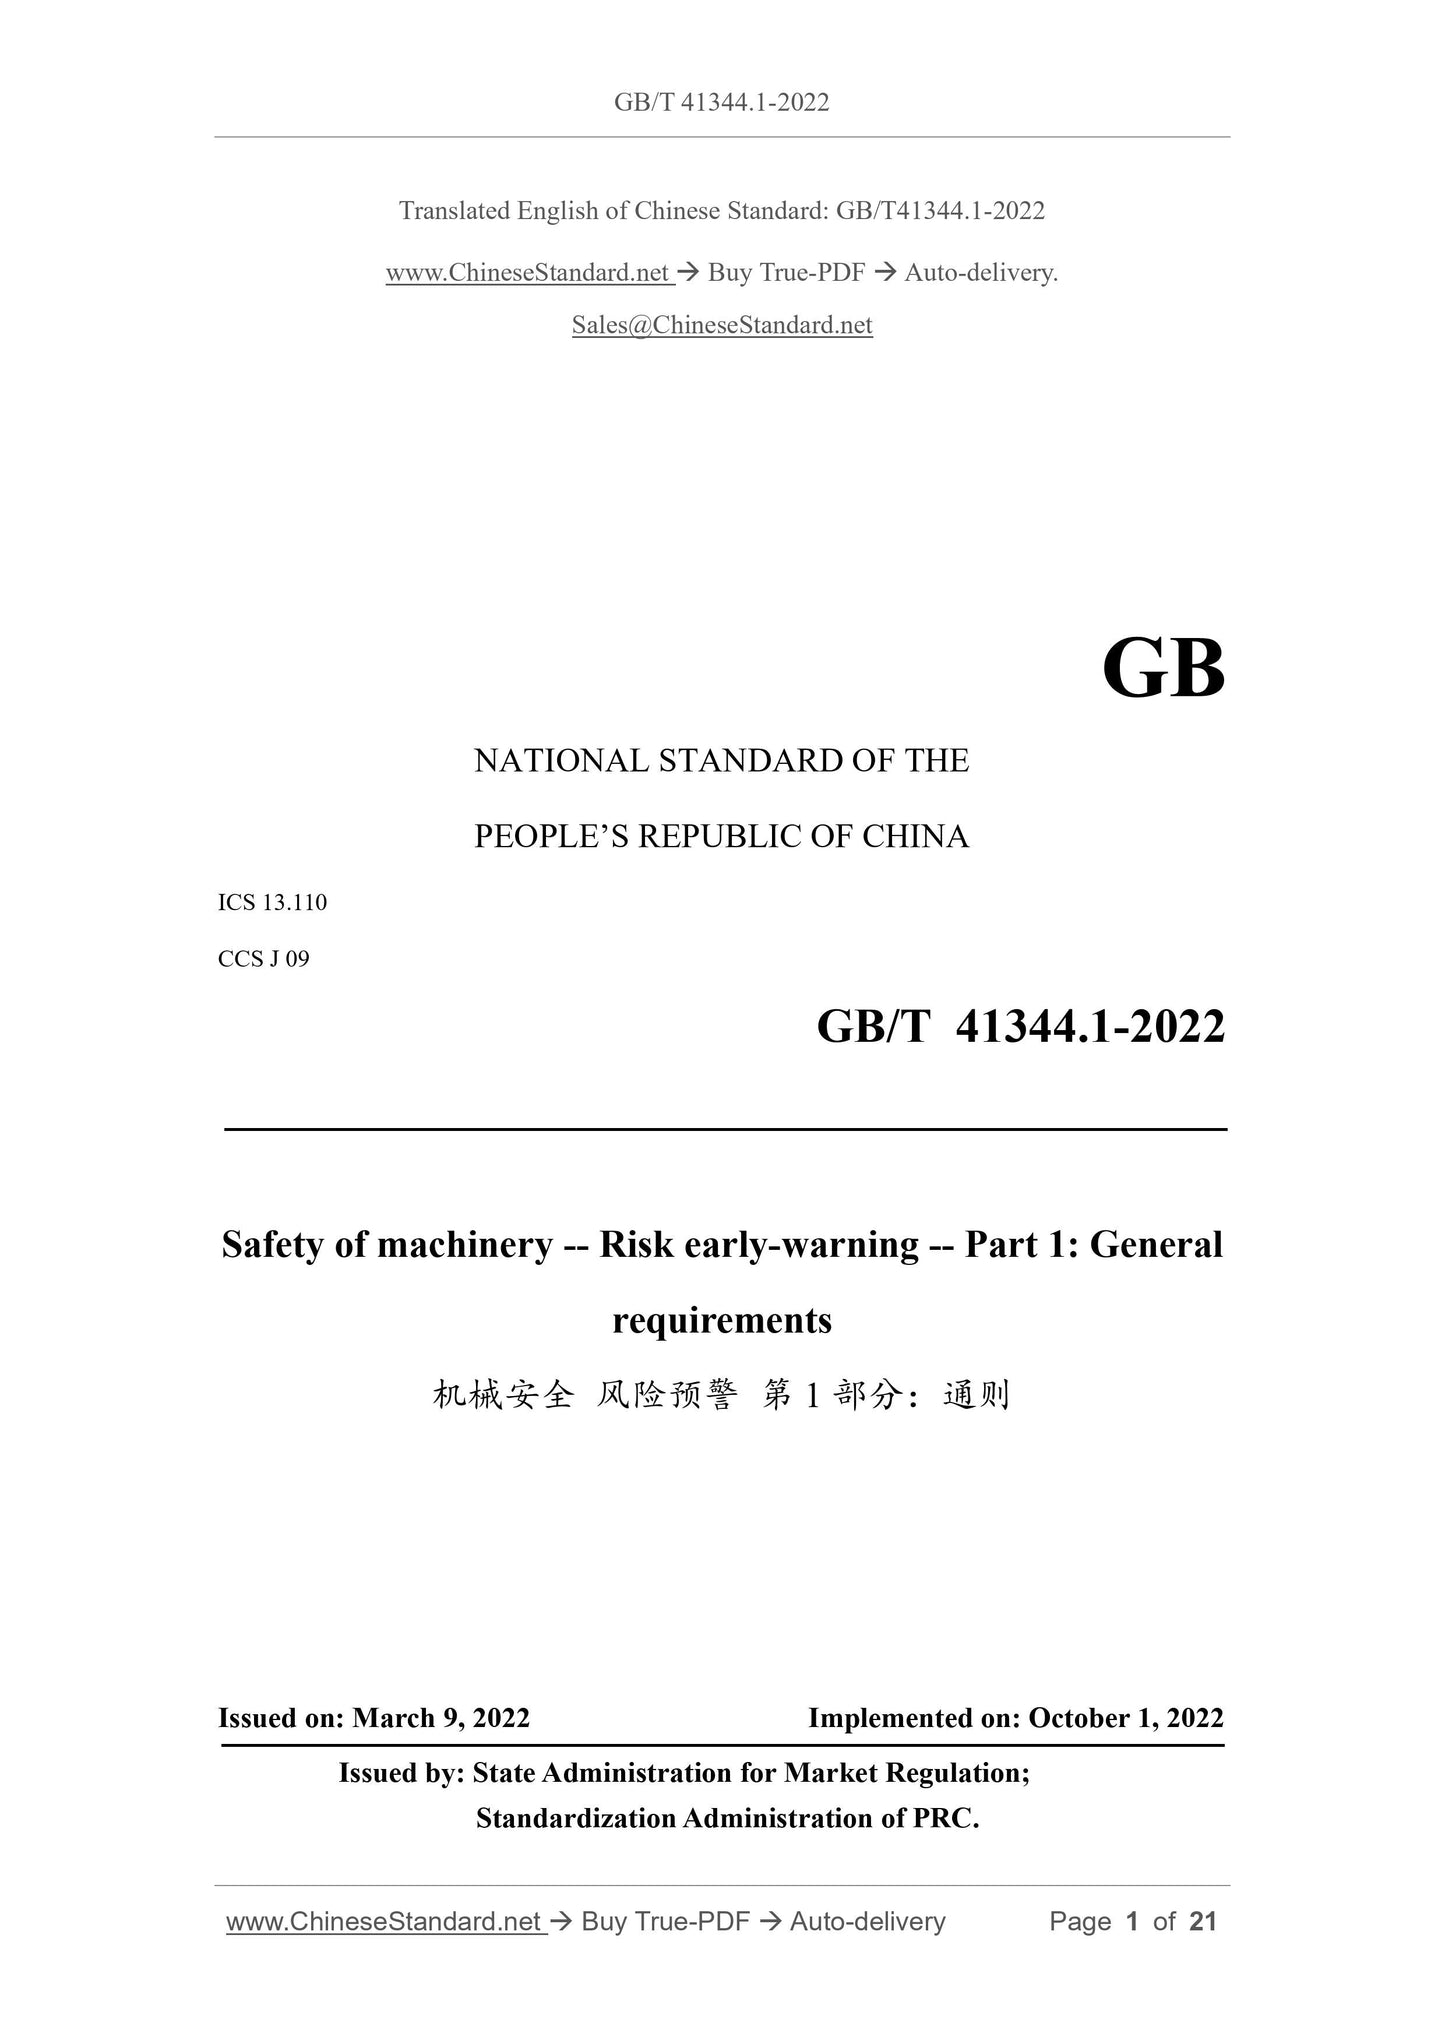 GB/T 41344.1-2022 Page 1